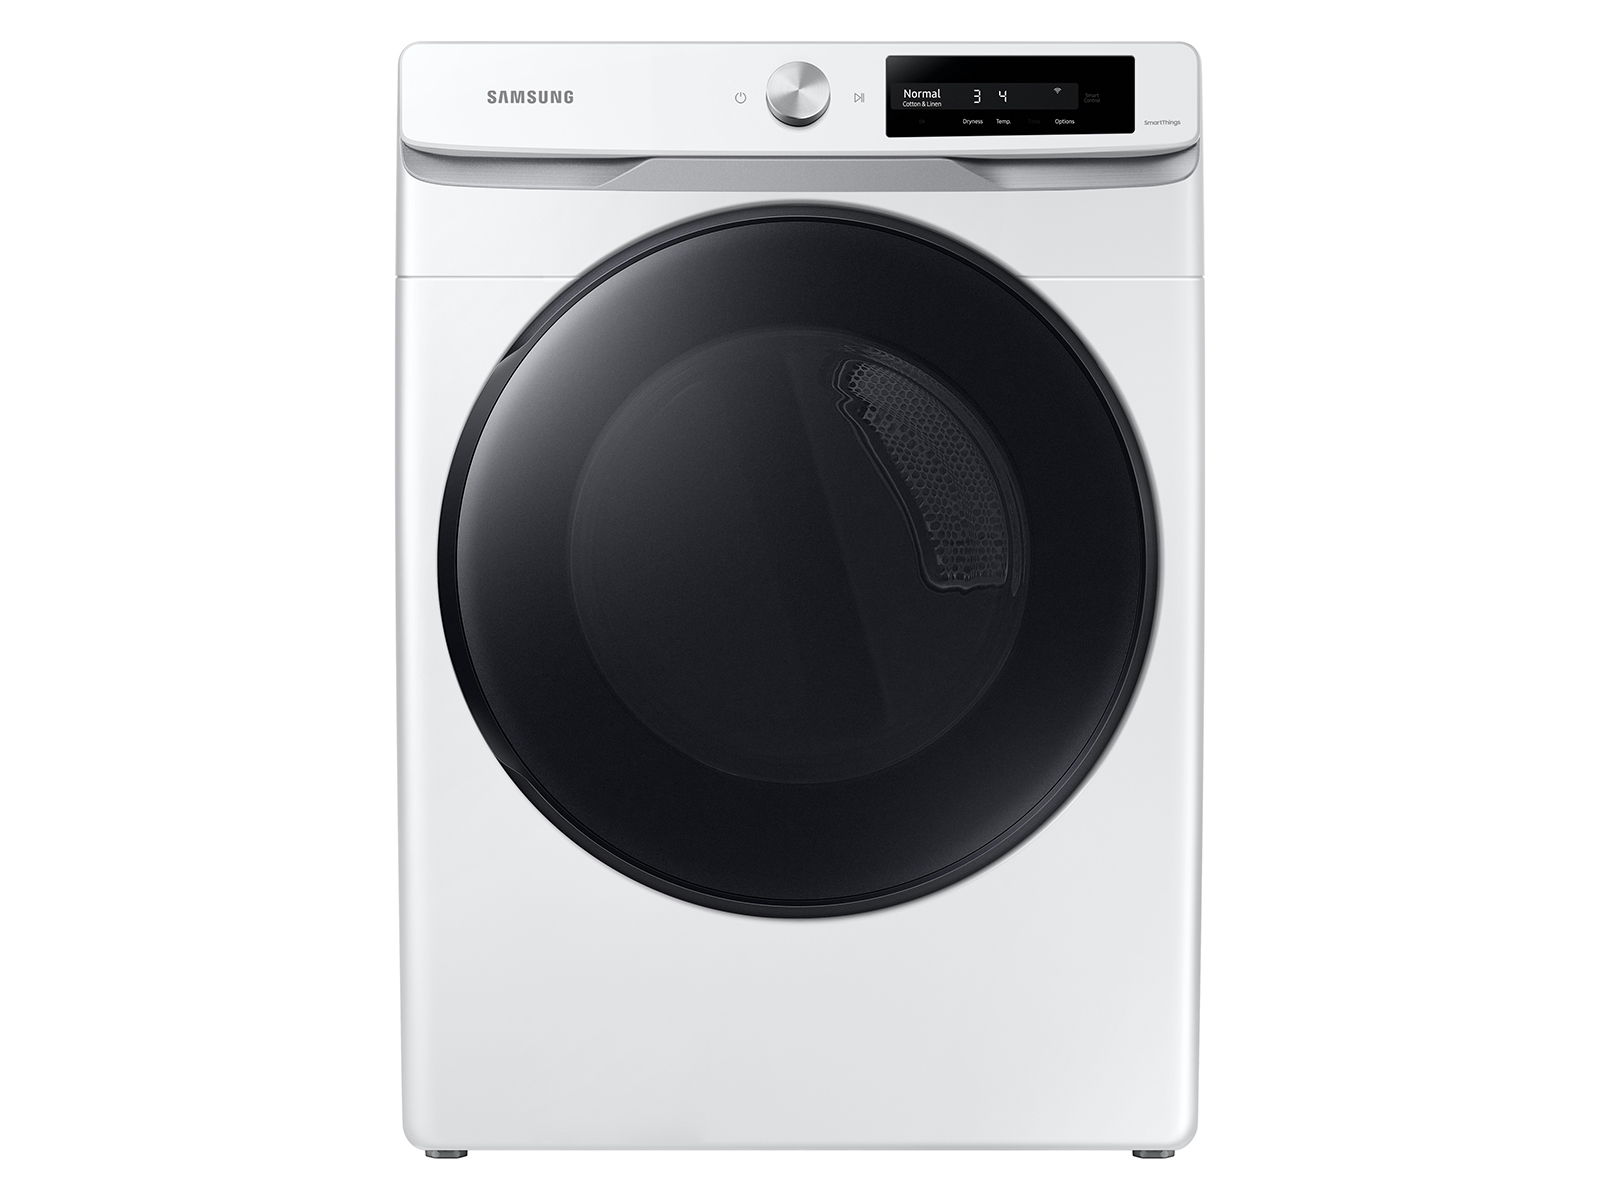 Photos - Tumble Dryer Samsung 7.5 cu. ft. Smart Dial Gas Dryer with Super Speed Dry in White(DVG 